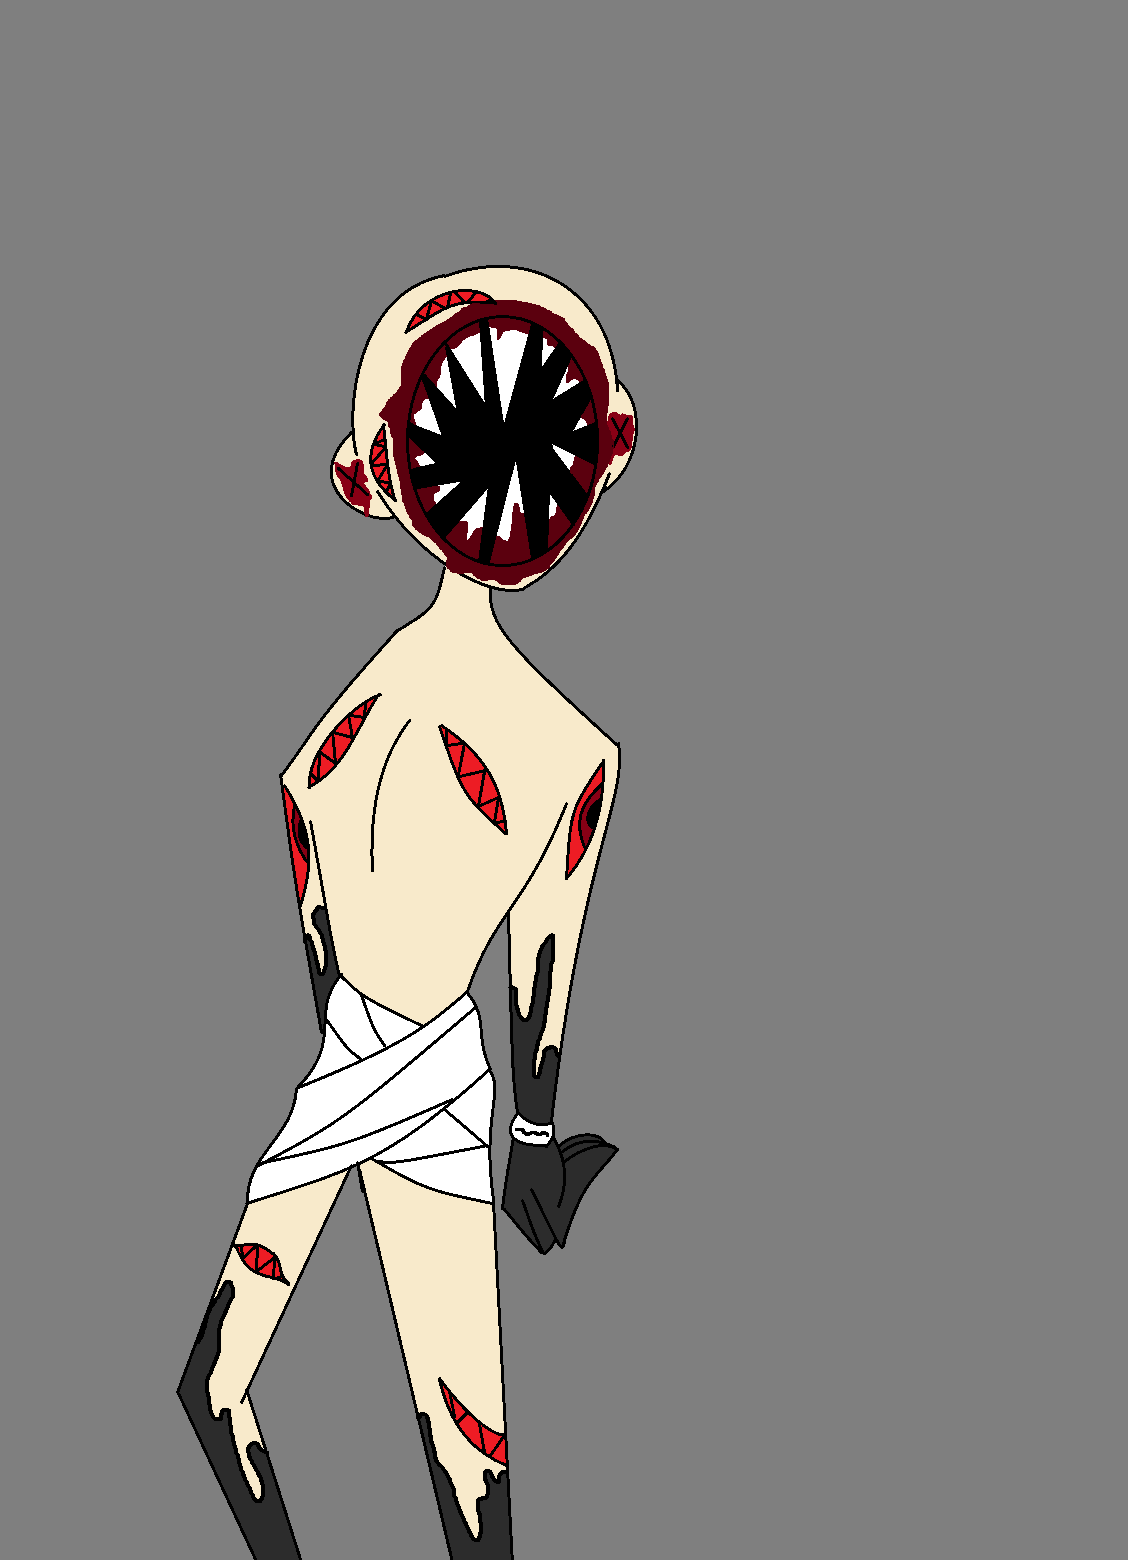 scp 076 getting shot, practicing drawing gore : r/SCP